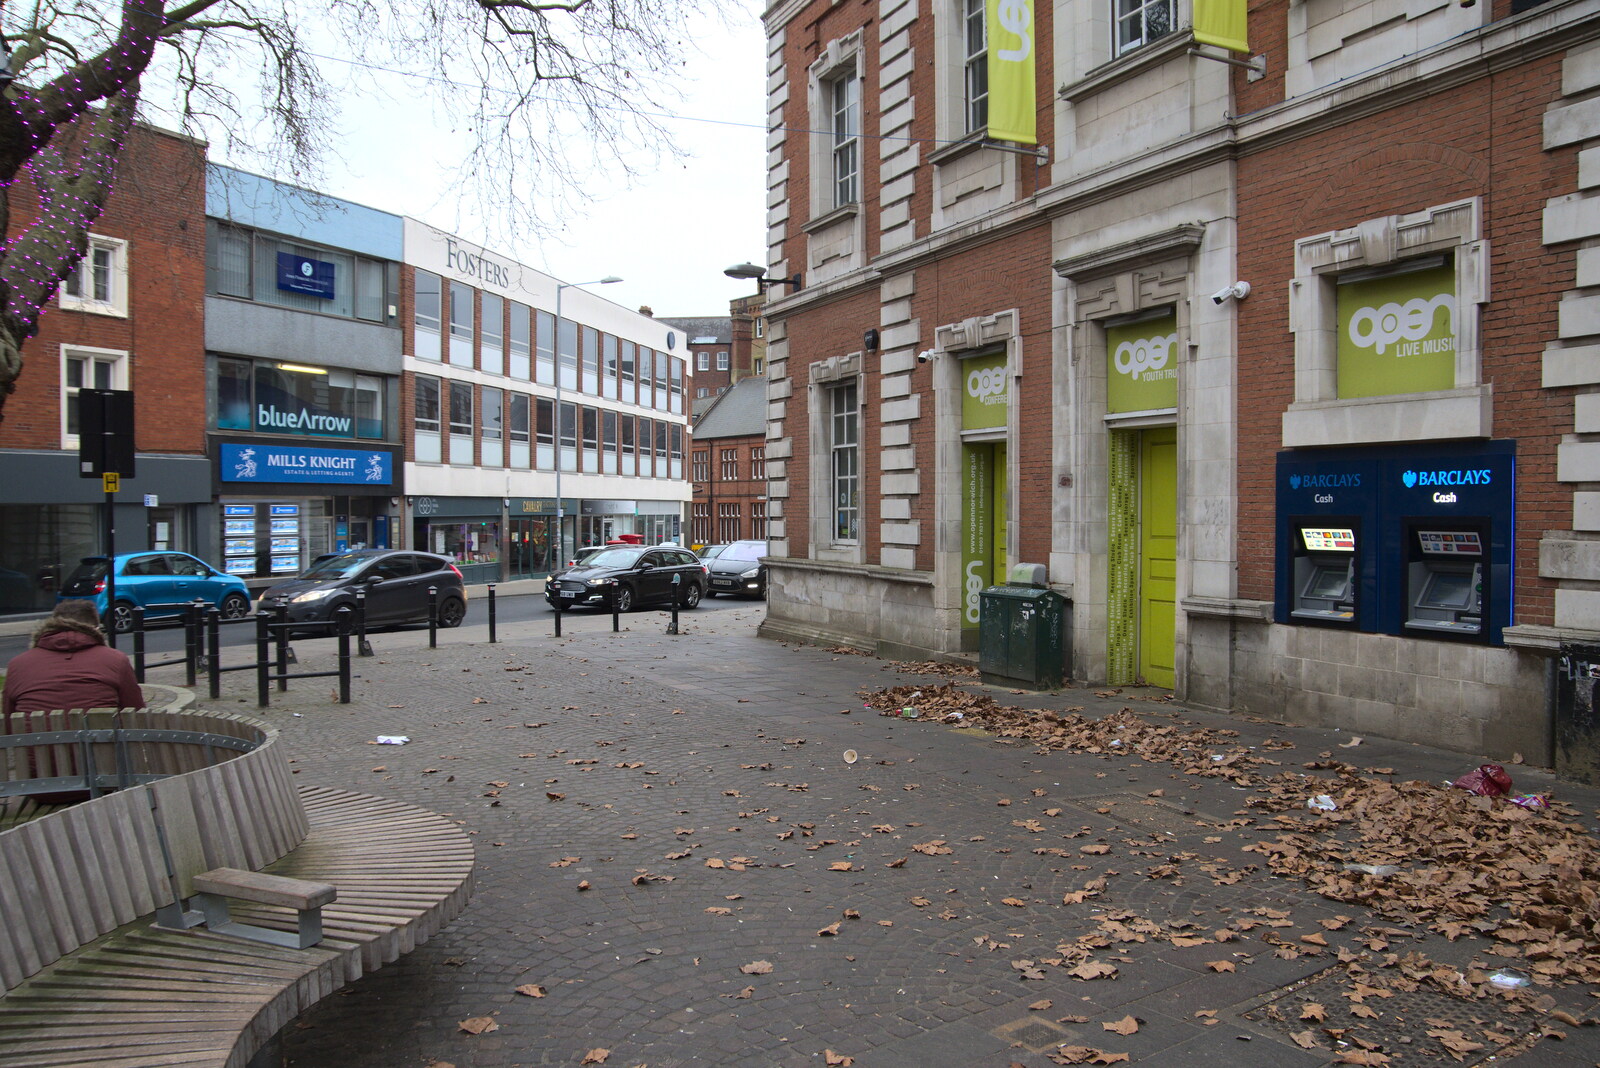 London Street joins Bank Plain from The Lost Pubs of Norwich, Norfolk - 13th February 2022